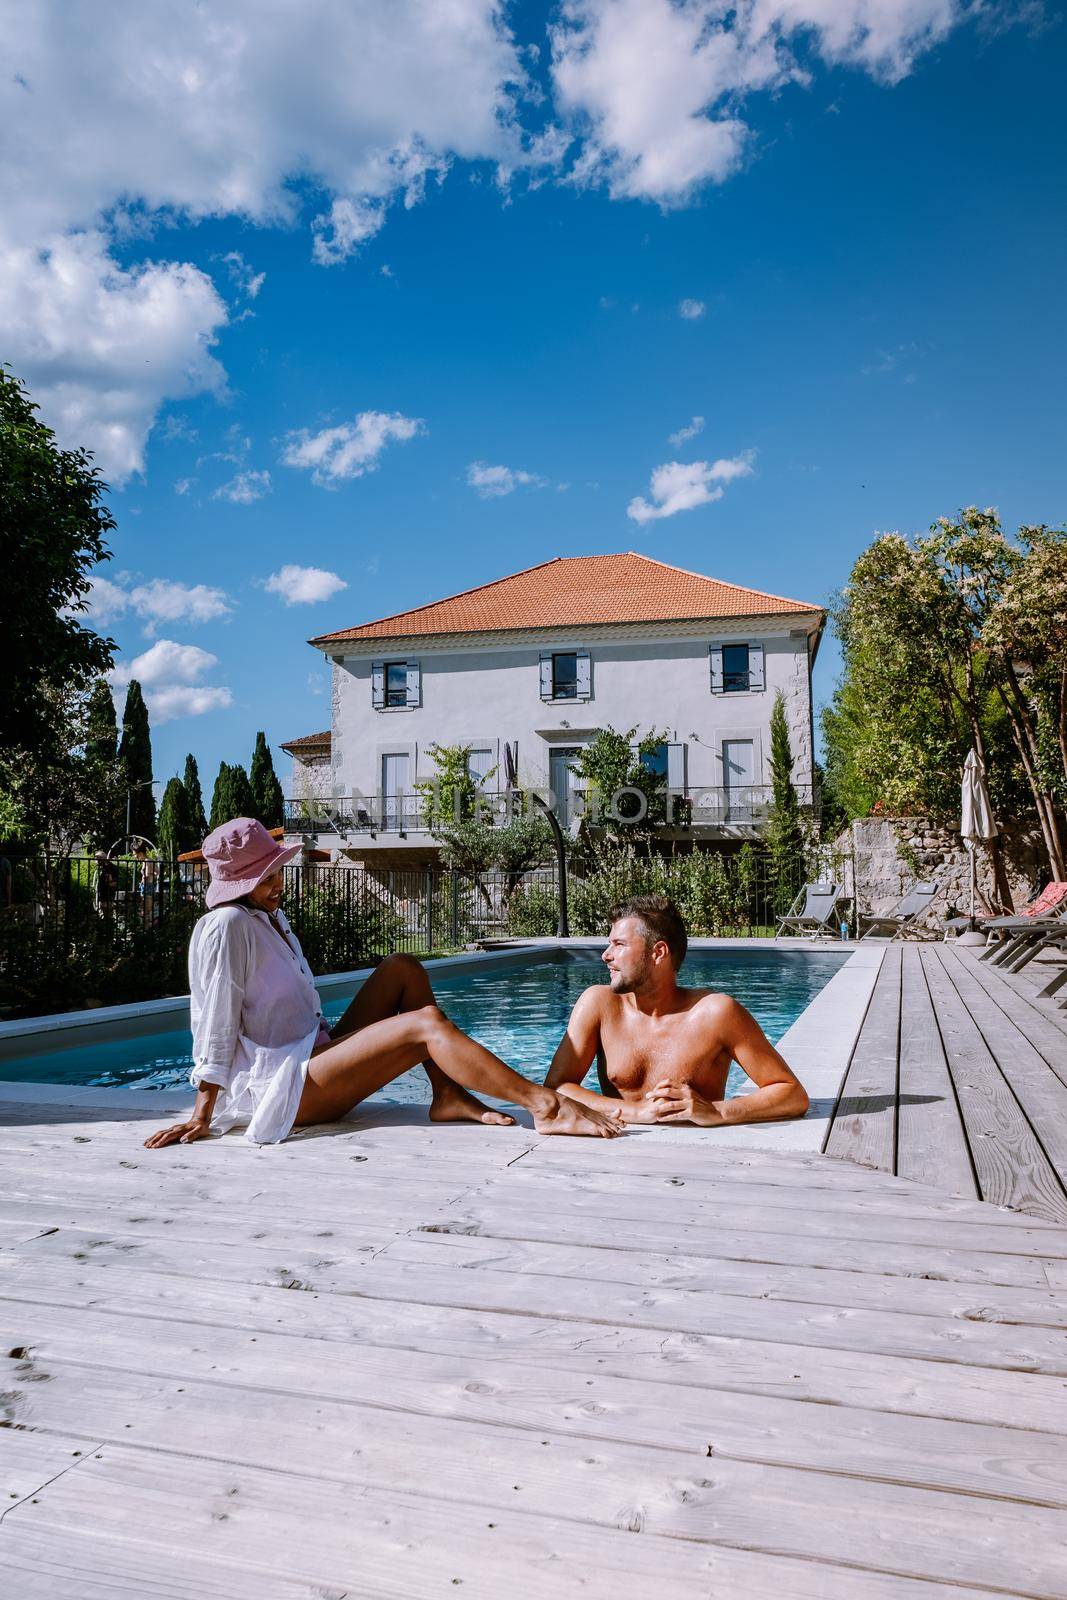 French vacation home with wooden deck and swimming pool in the Ardeche France Europe. Couple relaxing by the pool with wooden deck during luxury vacation at an holiday home in South of France